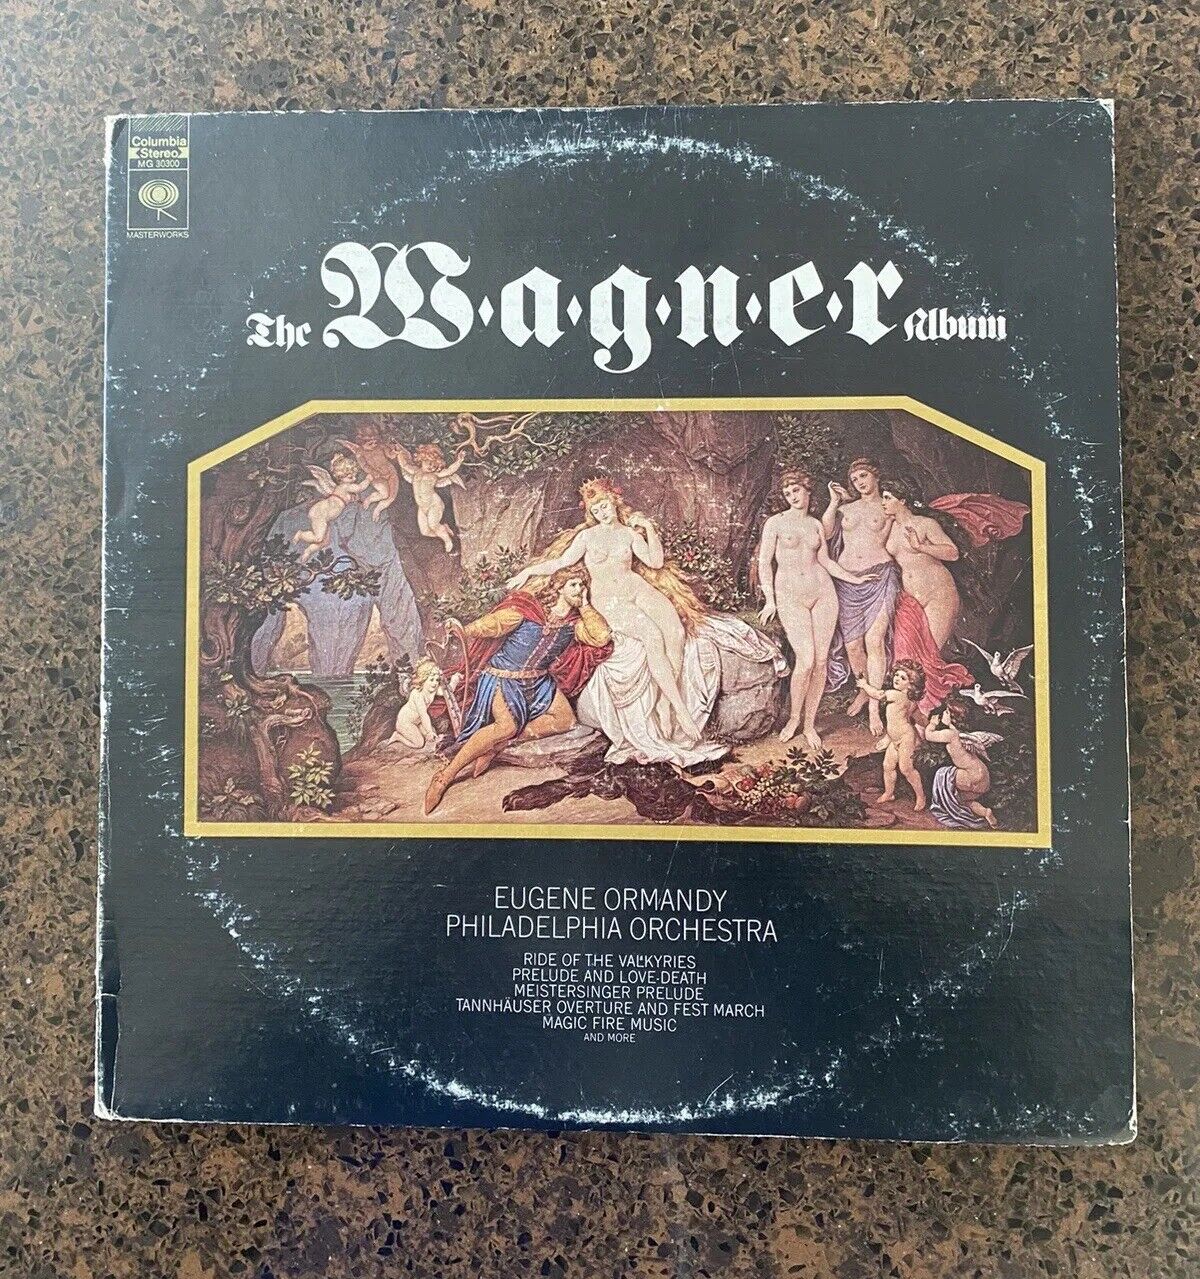 Richard Wagner “The Wagner Album” Performed By The Philadelphia Orchestra